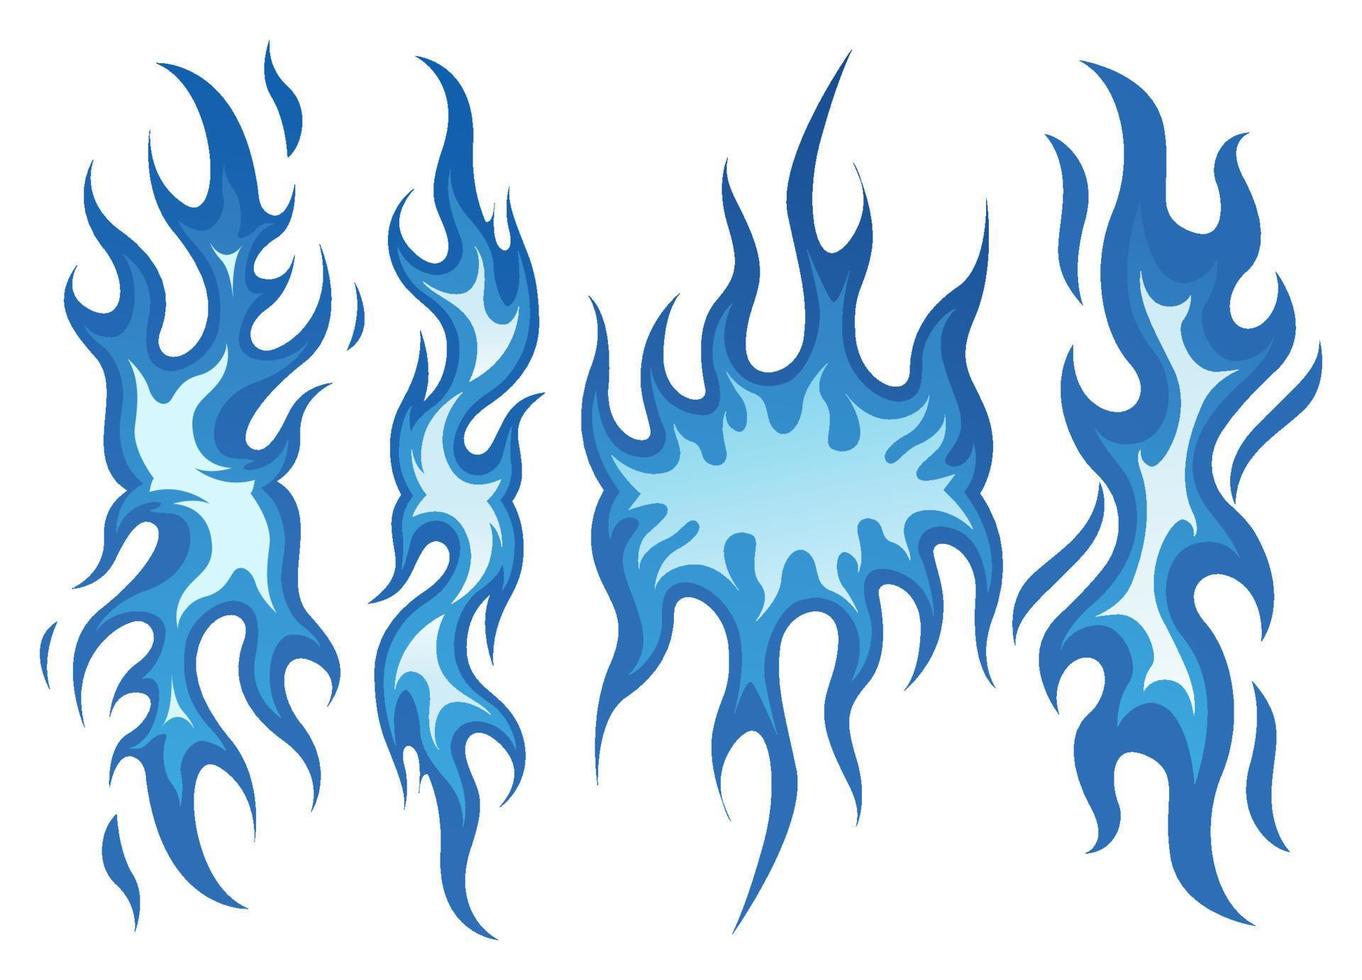 Set of blue flames vector illustration element, background, frame, effects, layout. Vector eps 10. Cartoon of flames.